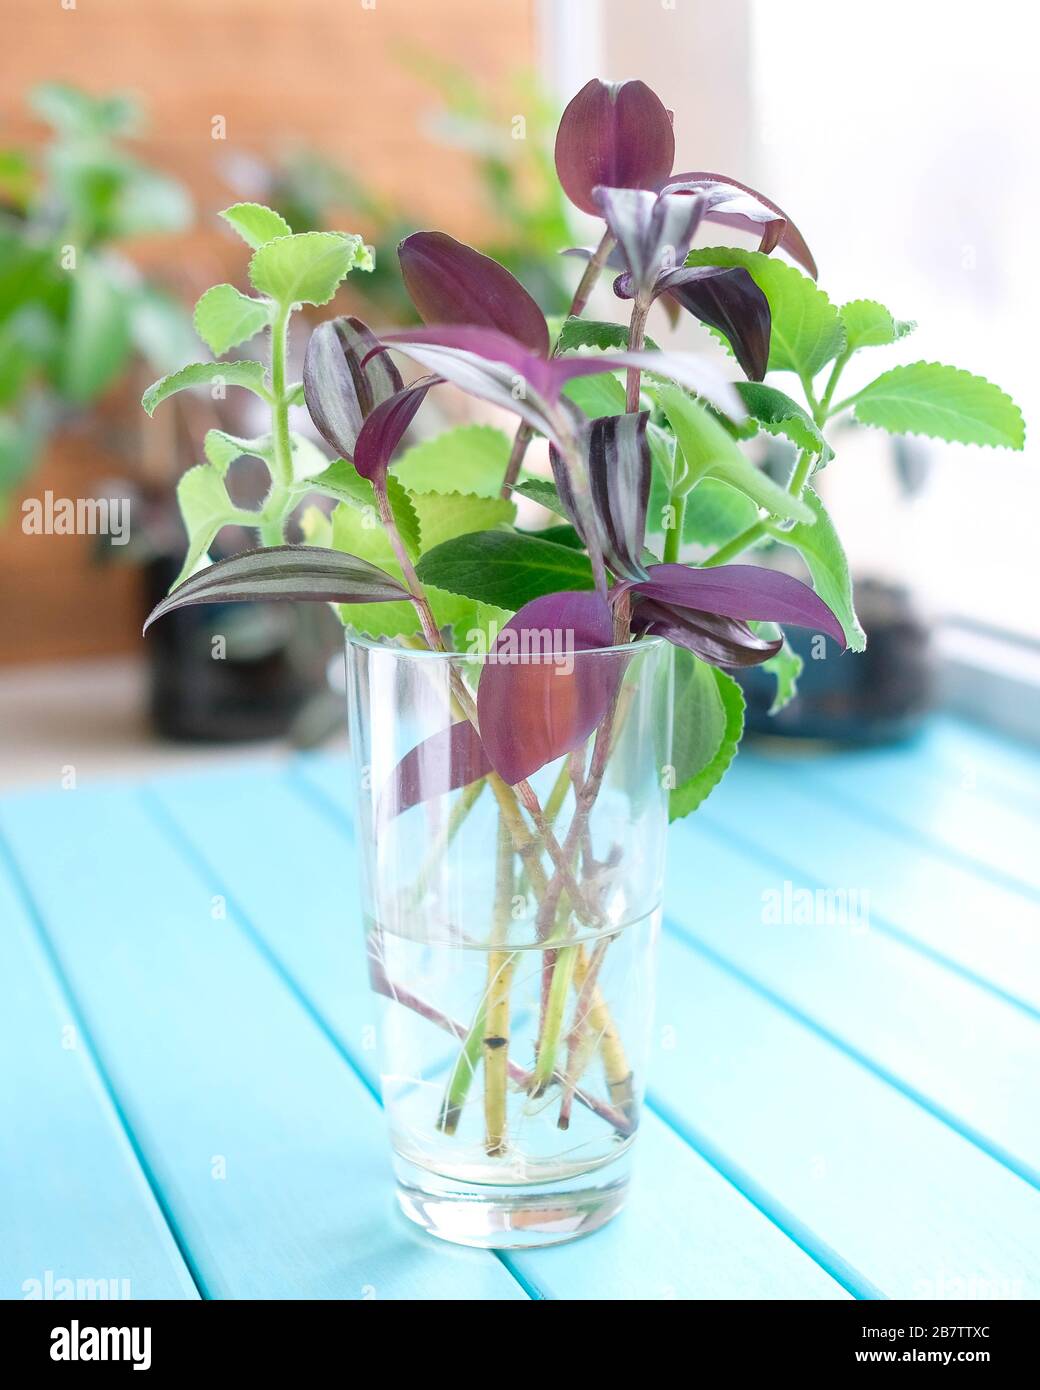 Plants in a glass. Zebrina and amboynikus take roots. Green and burgundy sprouts in the water. Stock Photo